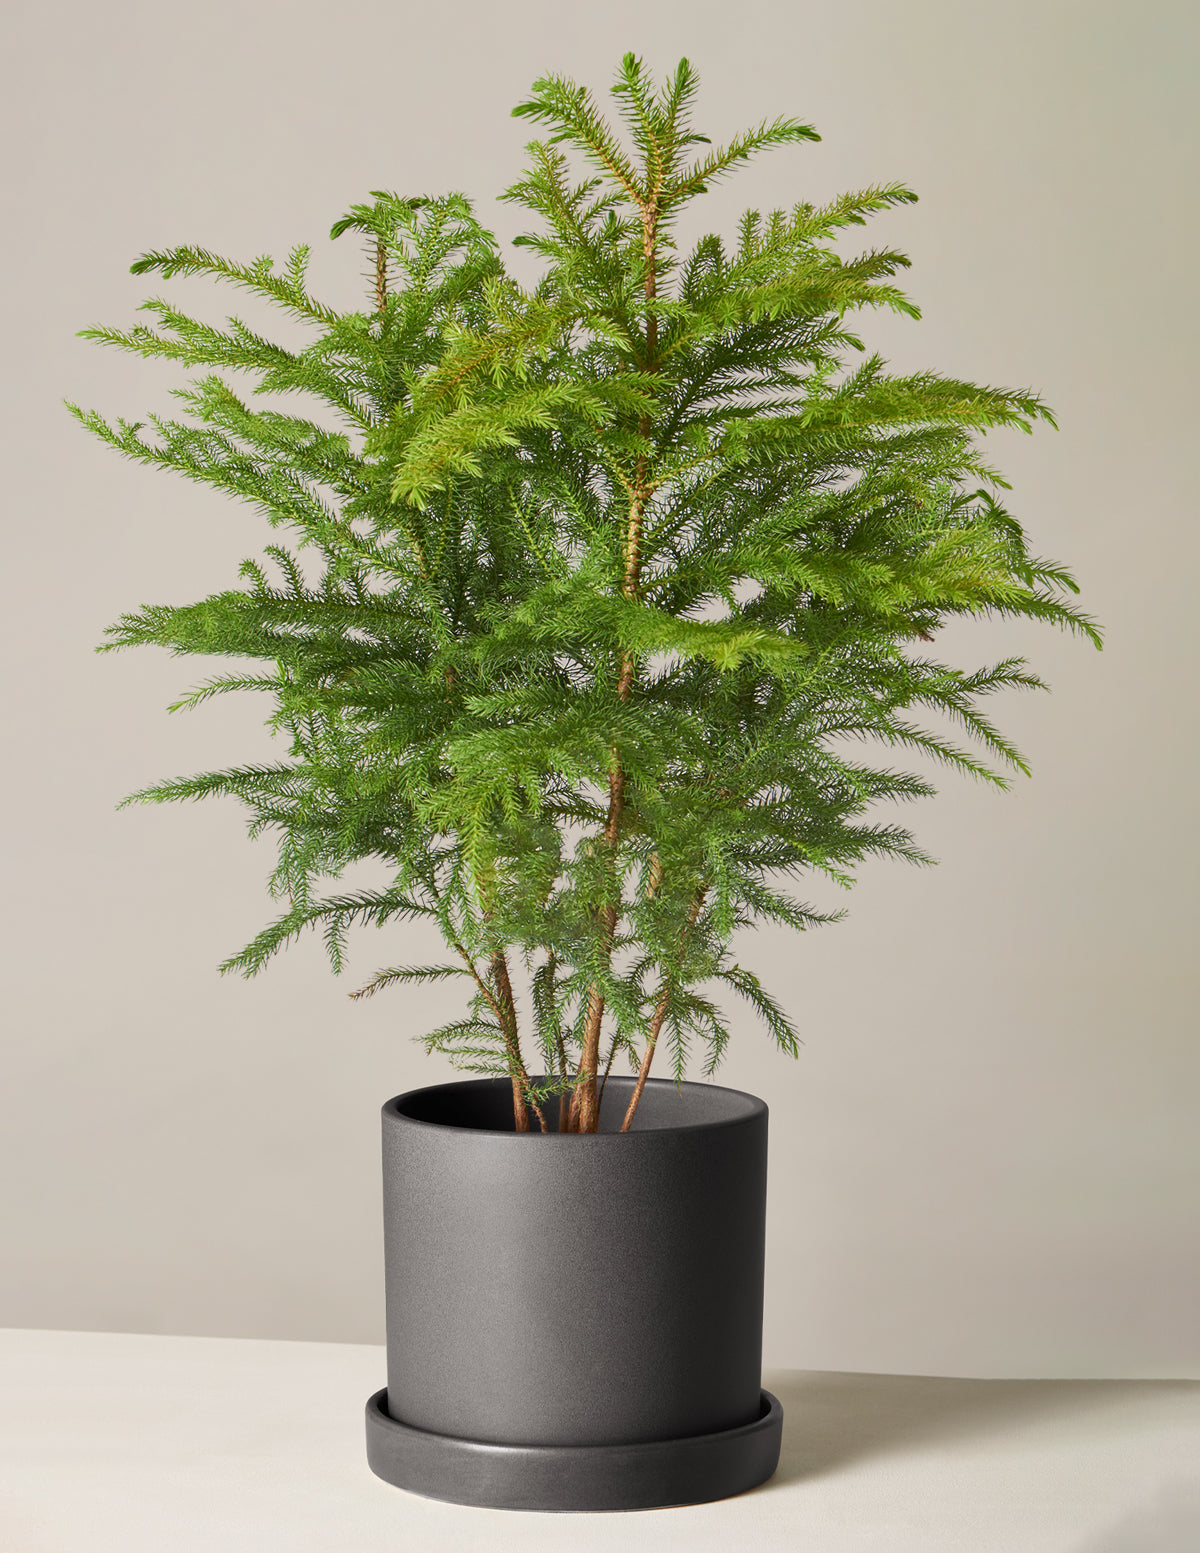 Norfolk Island Pine Tree | Houseplants and Gifts for Delivery | The Sill